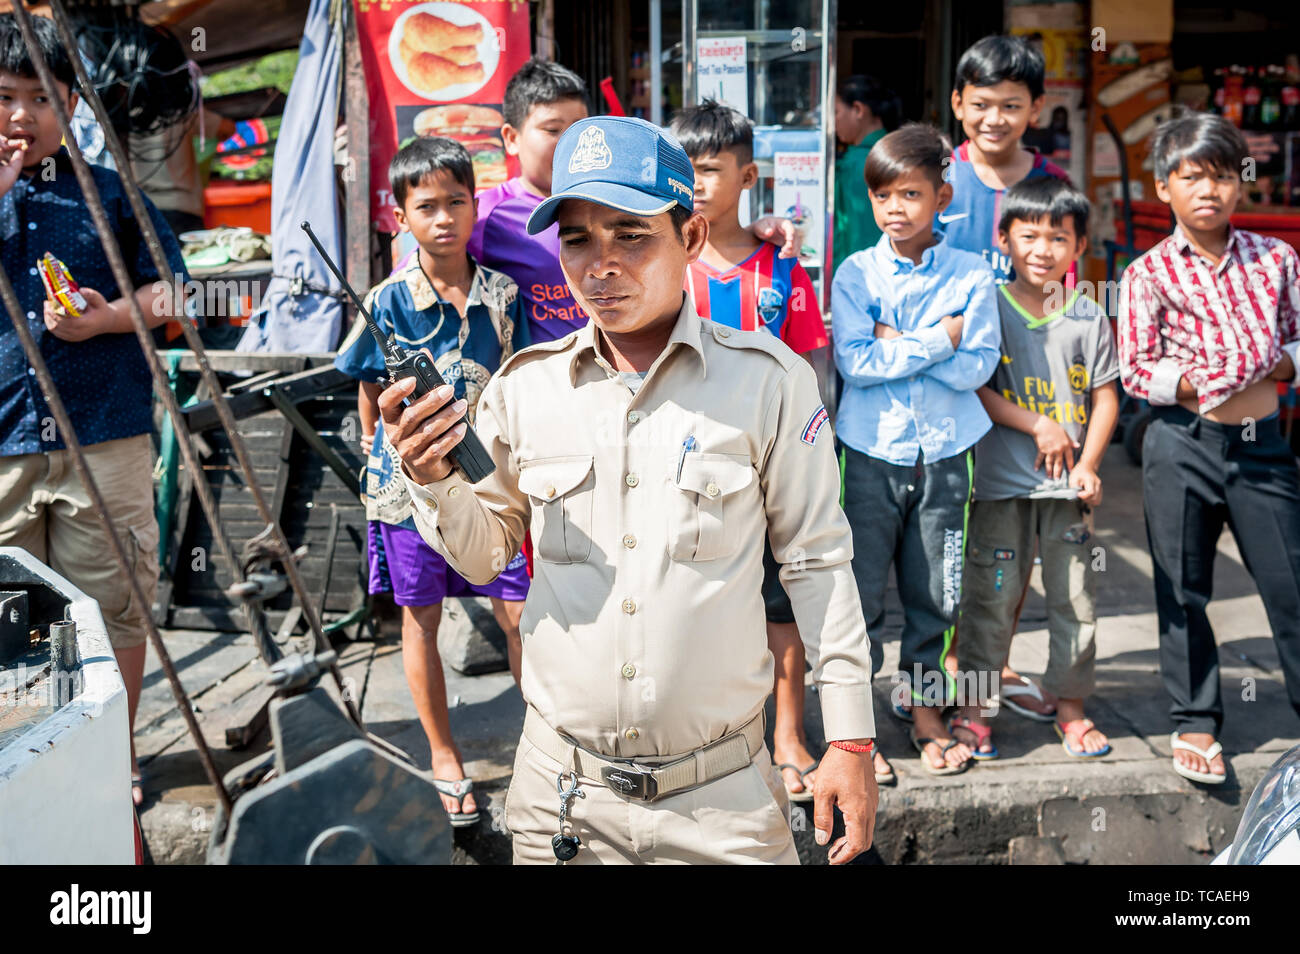 A Cambodian policeman surrounded by street kids attends to a situation in the Cambodian city of Phnom Penh. Stock Photo